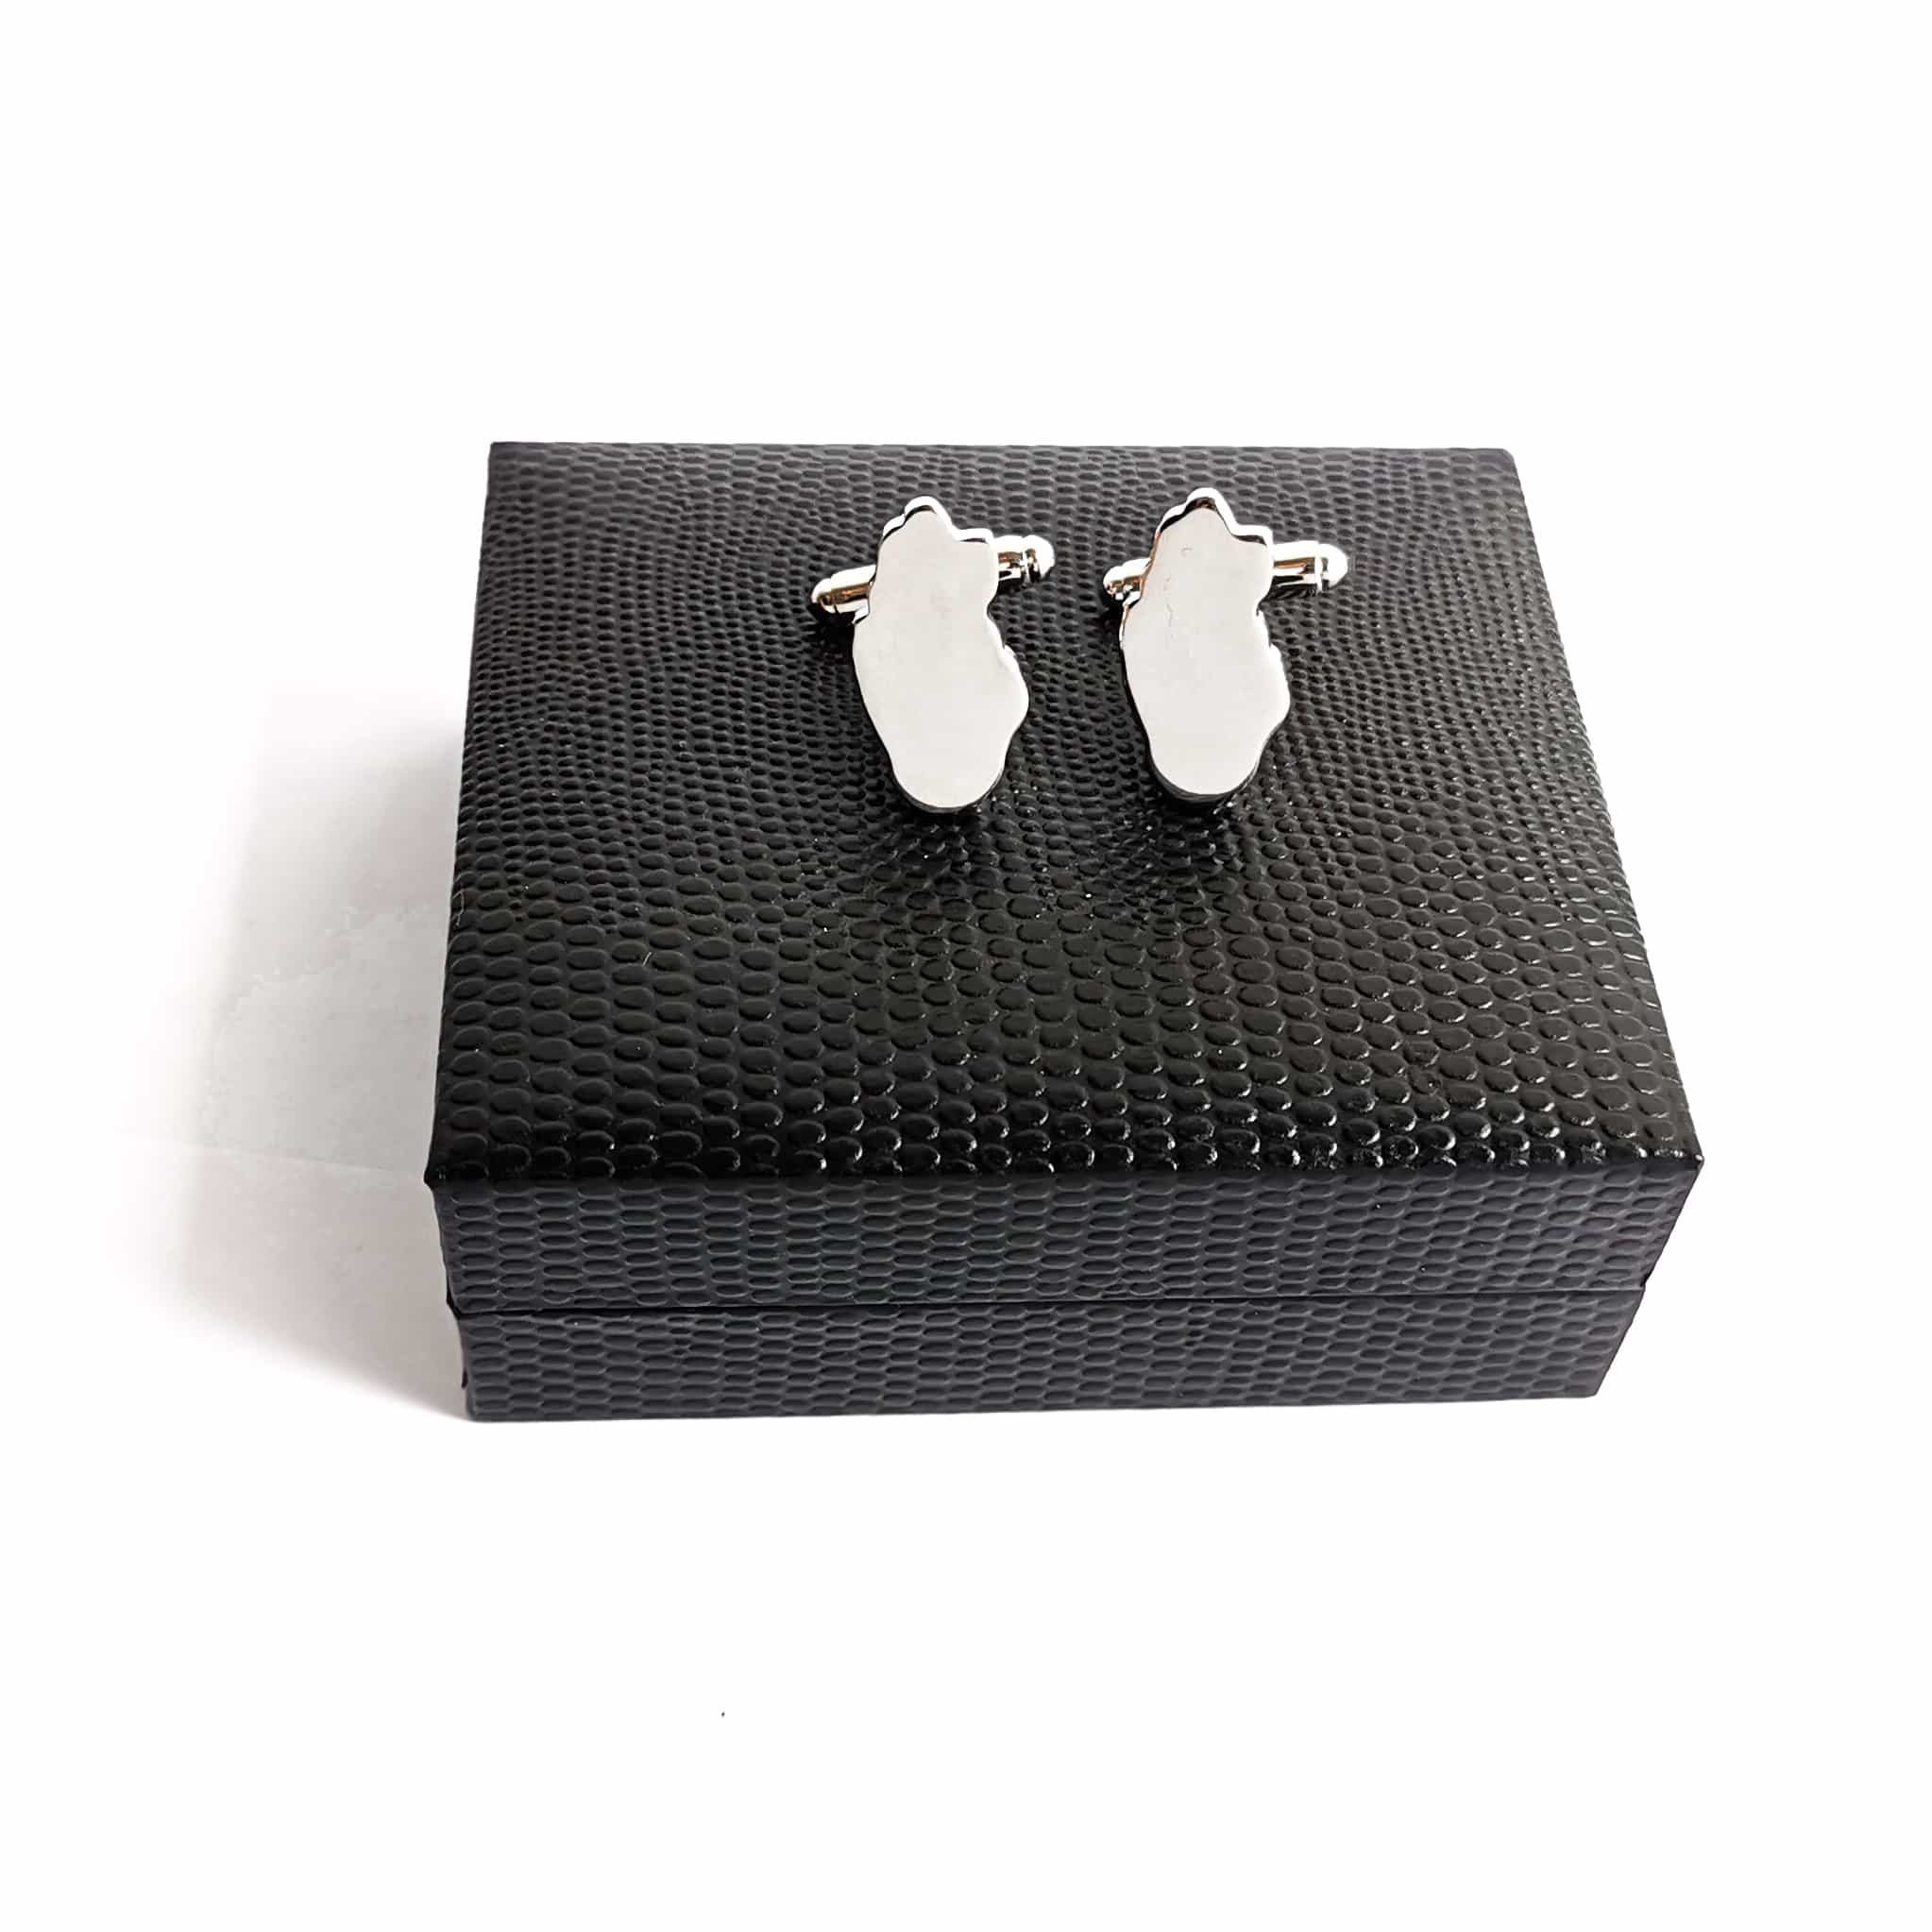 High Quality Qatar Map Shape Metal Cufflink with Leather Crozzling Box Shirt Suit for Men Decoration